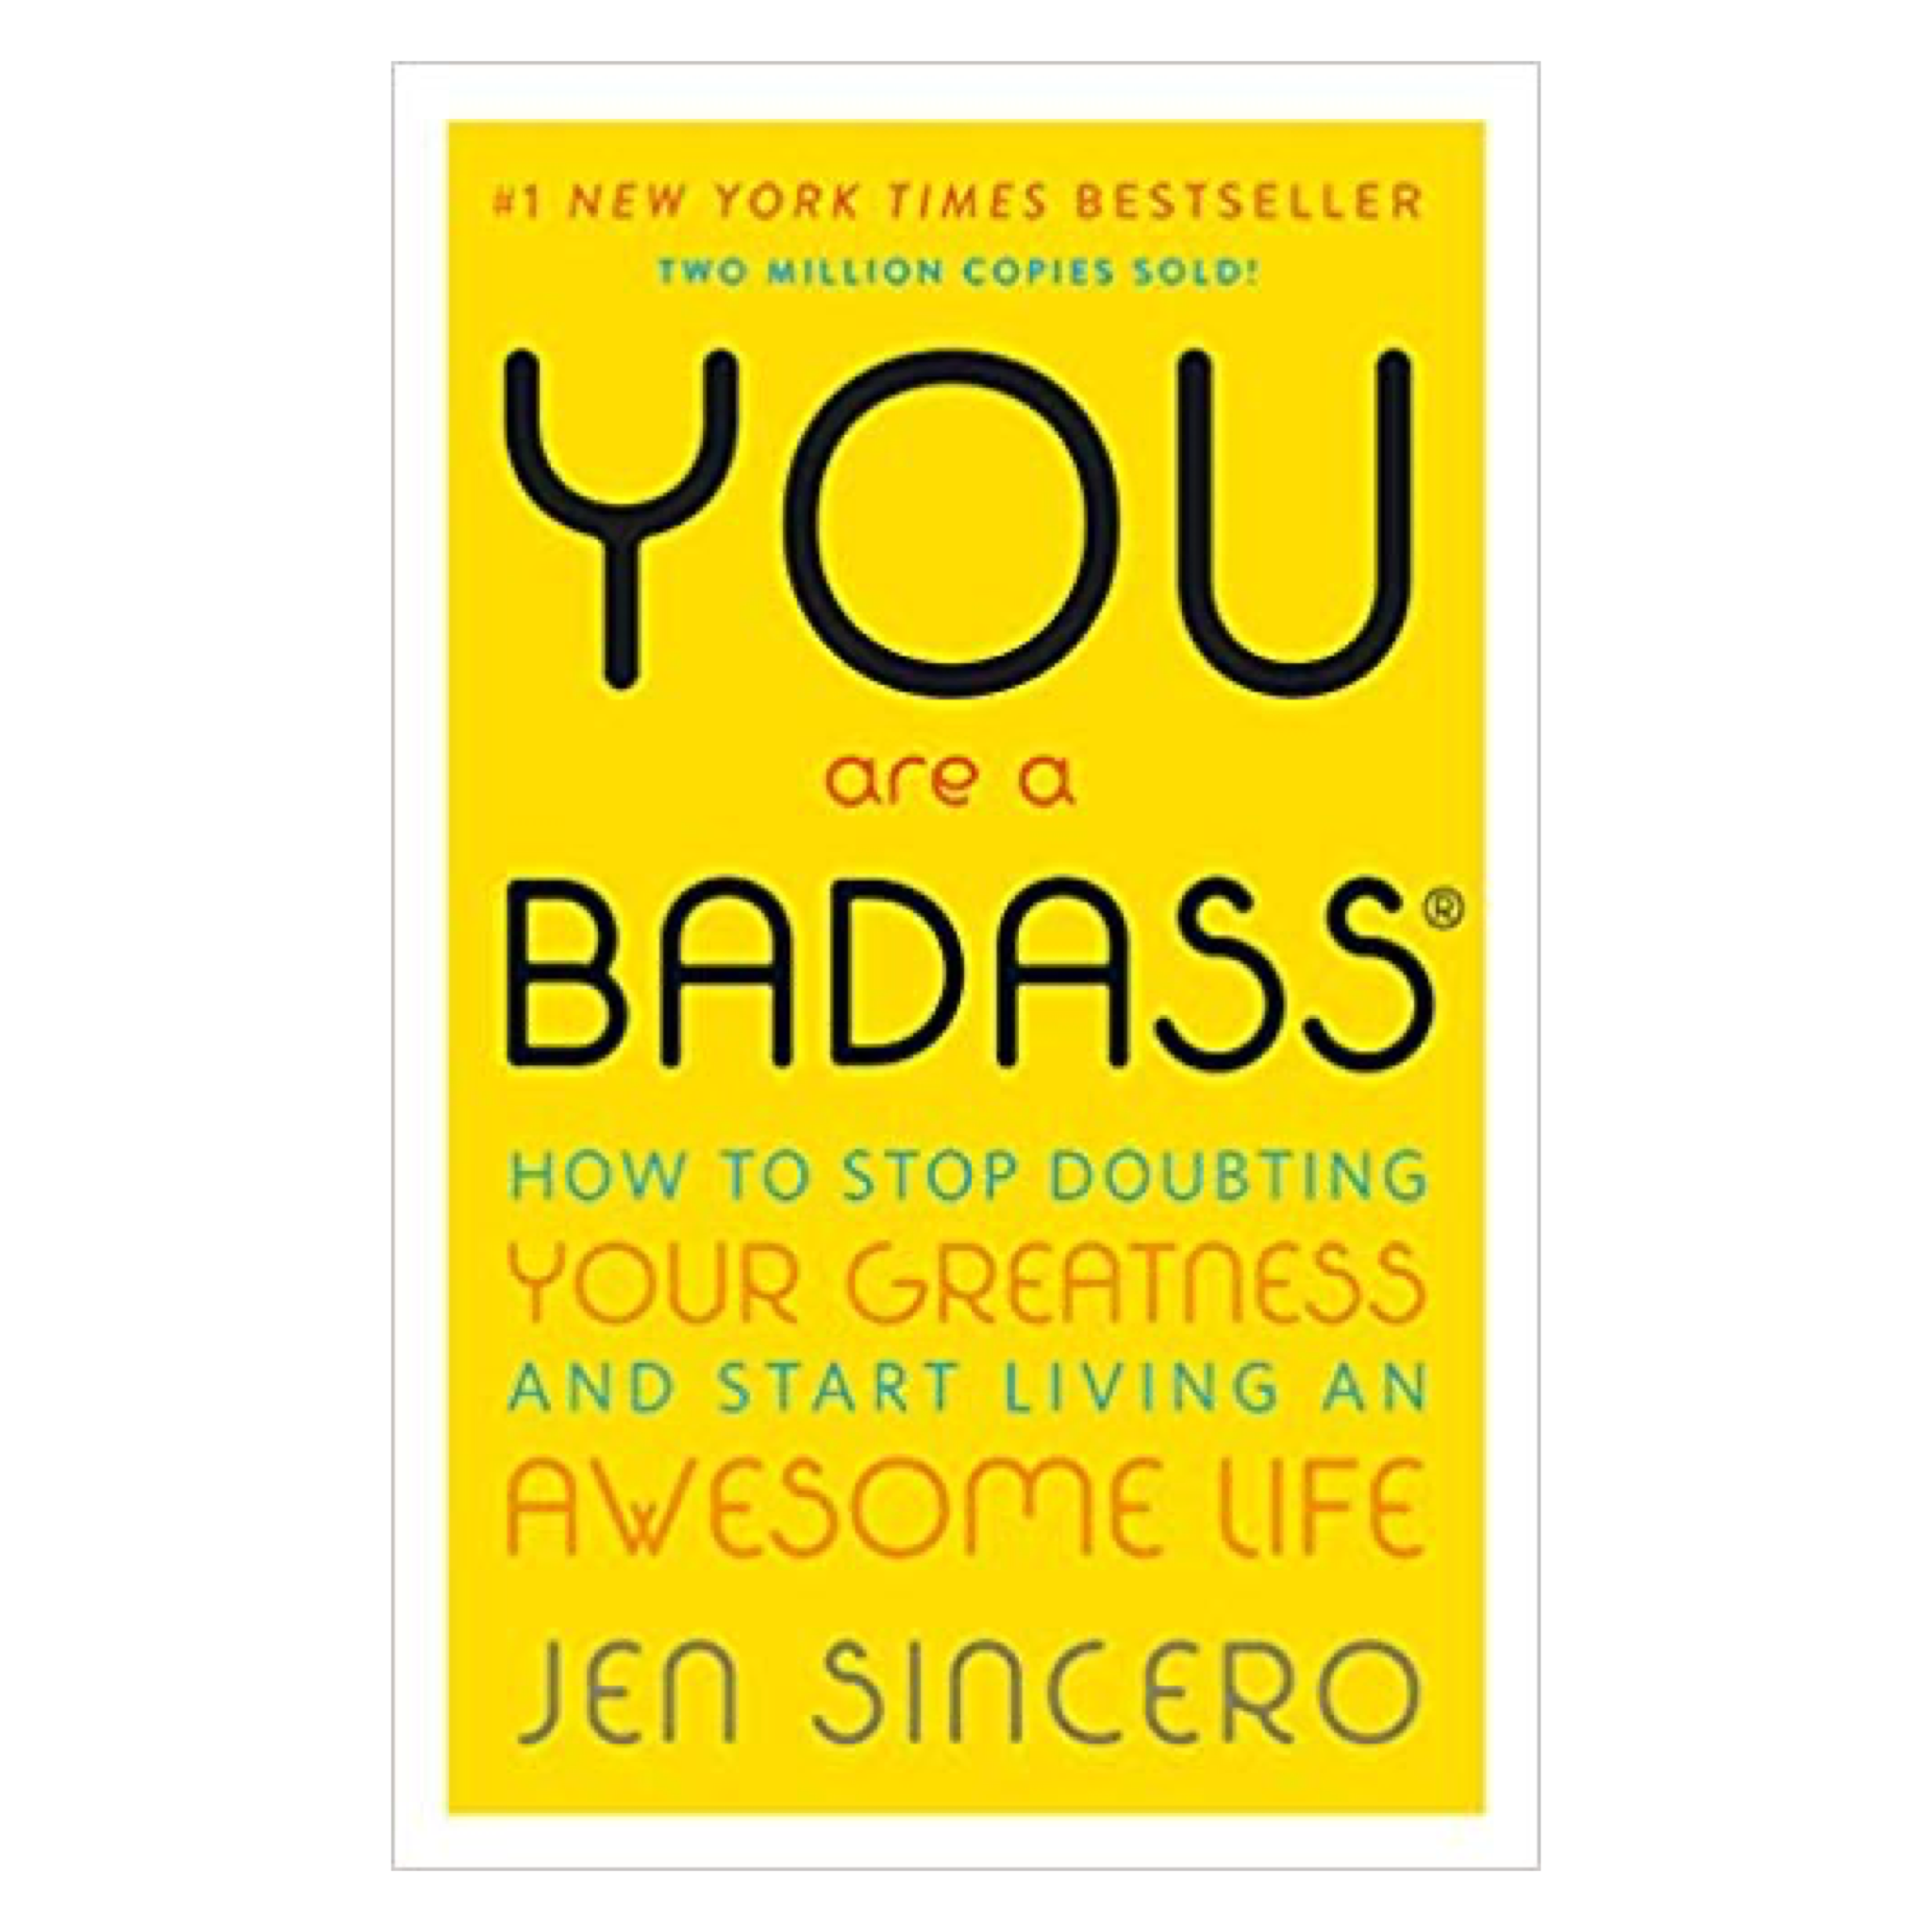 You are A Badass by Jen Sincero